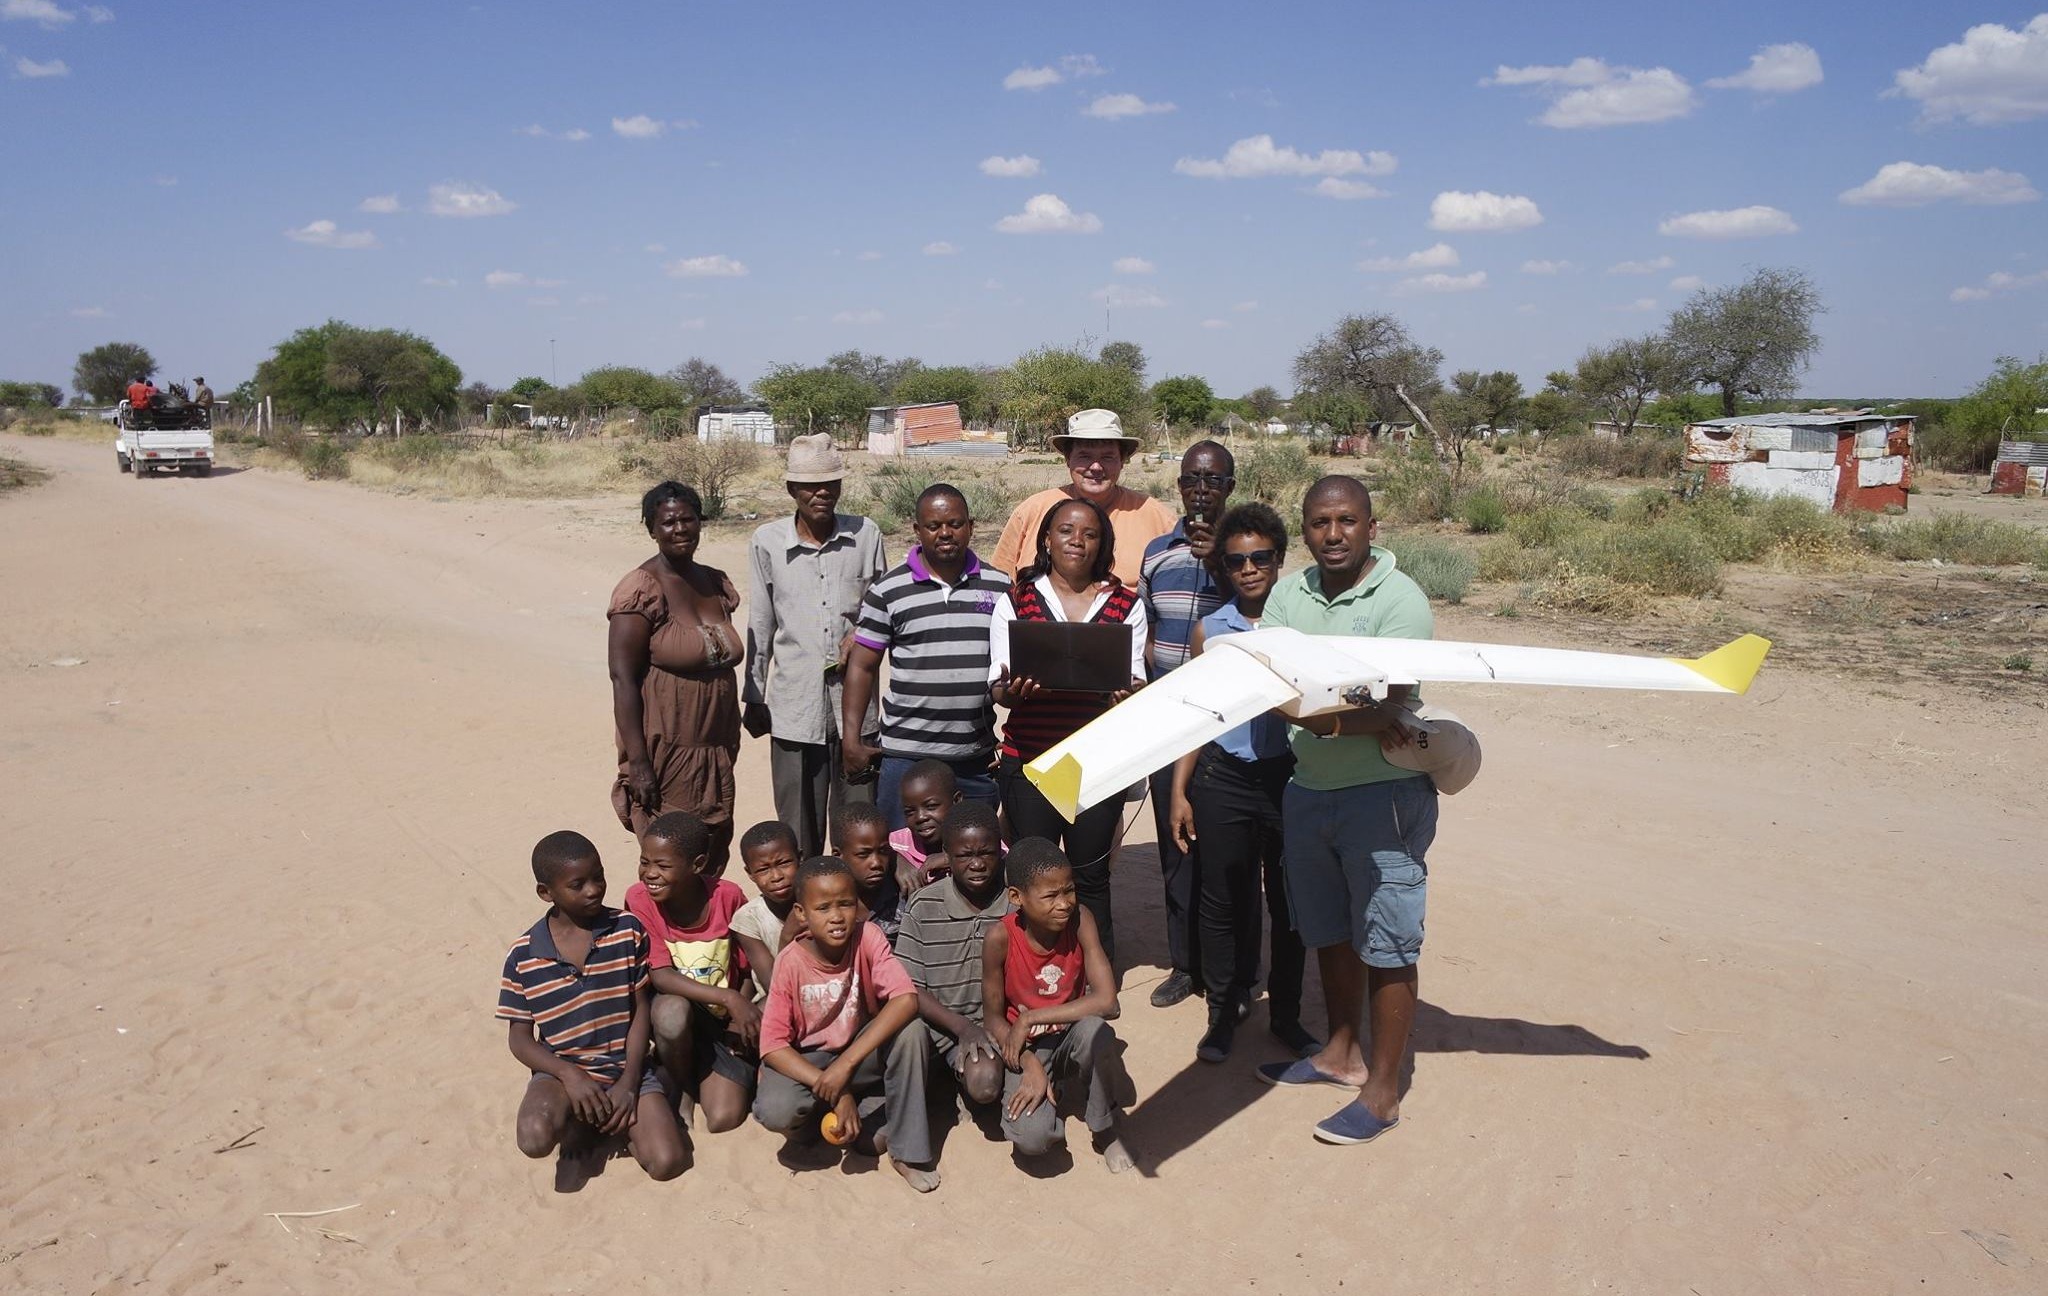 Drawing with UAV mapping in Namibia | Pix4D